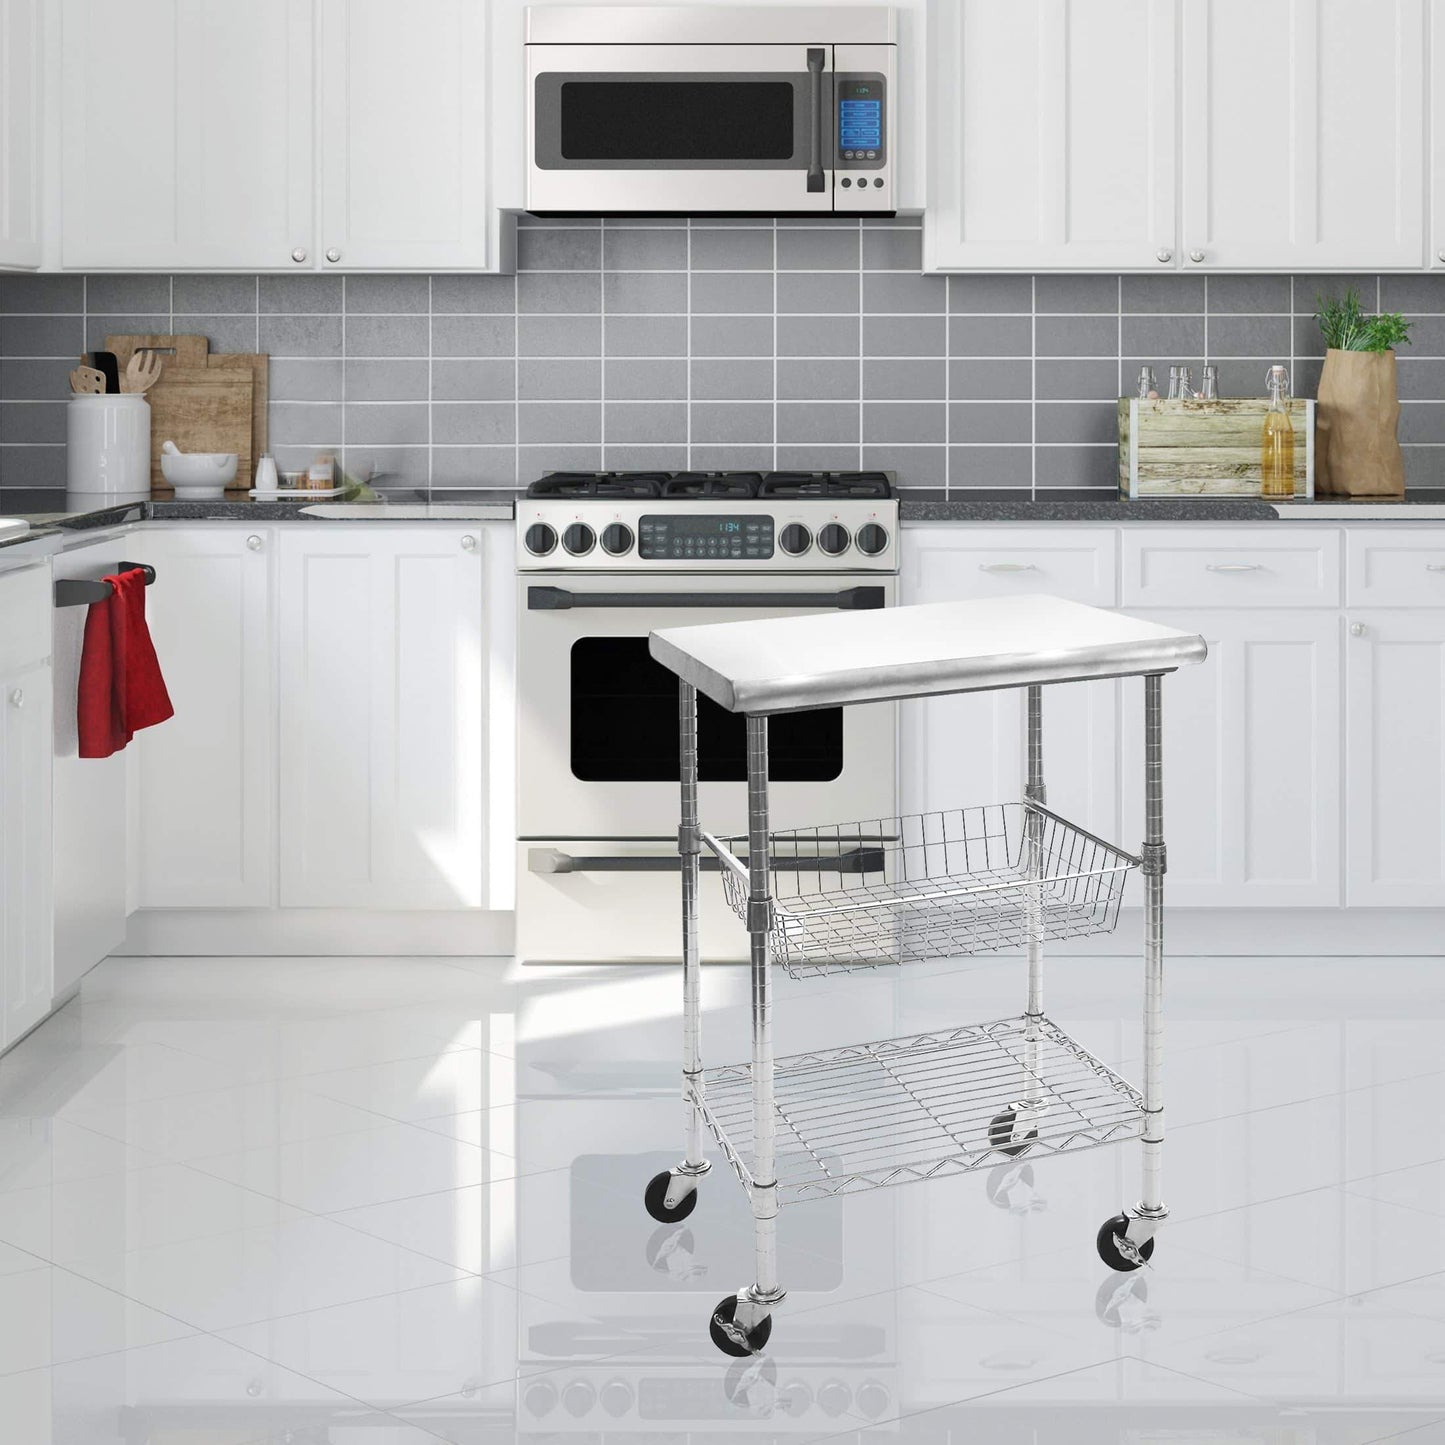 New seville classics stainless steel nsf certified professional kitchen work table cart 24 w x 20 d x 36 h